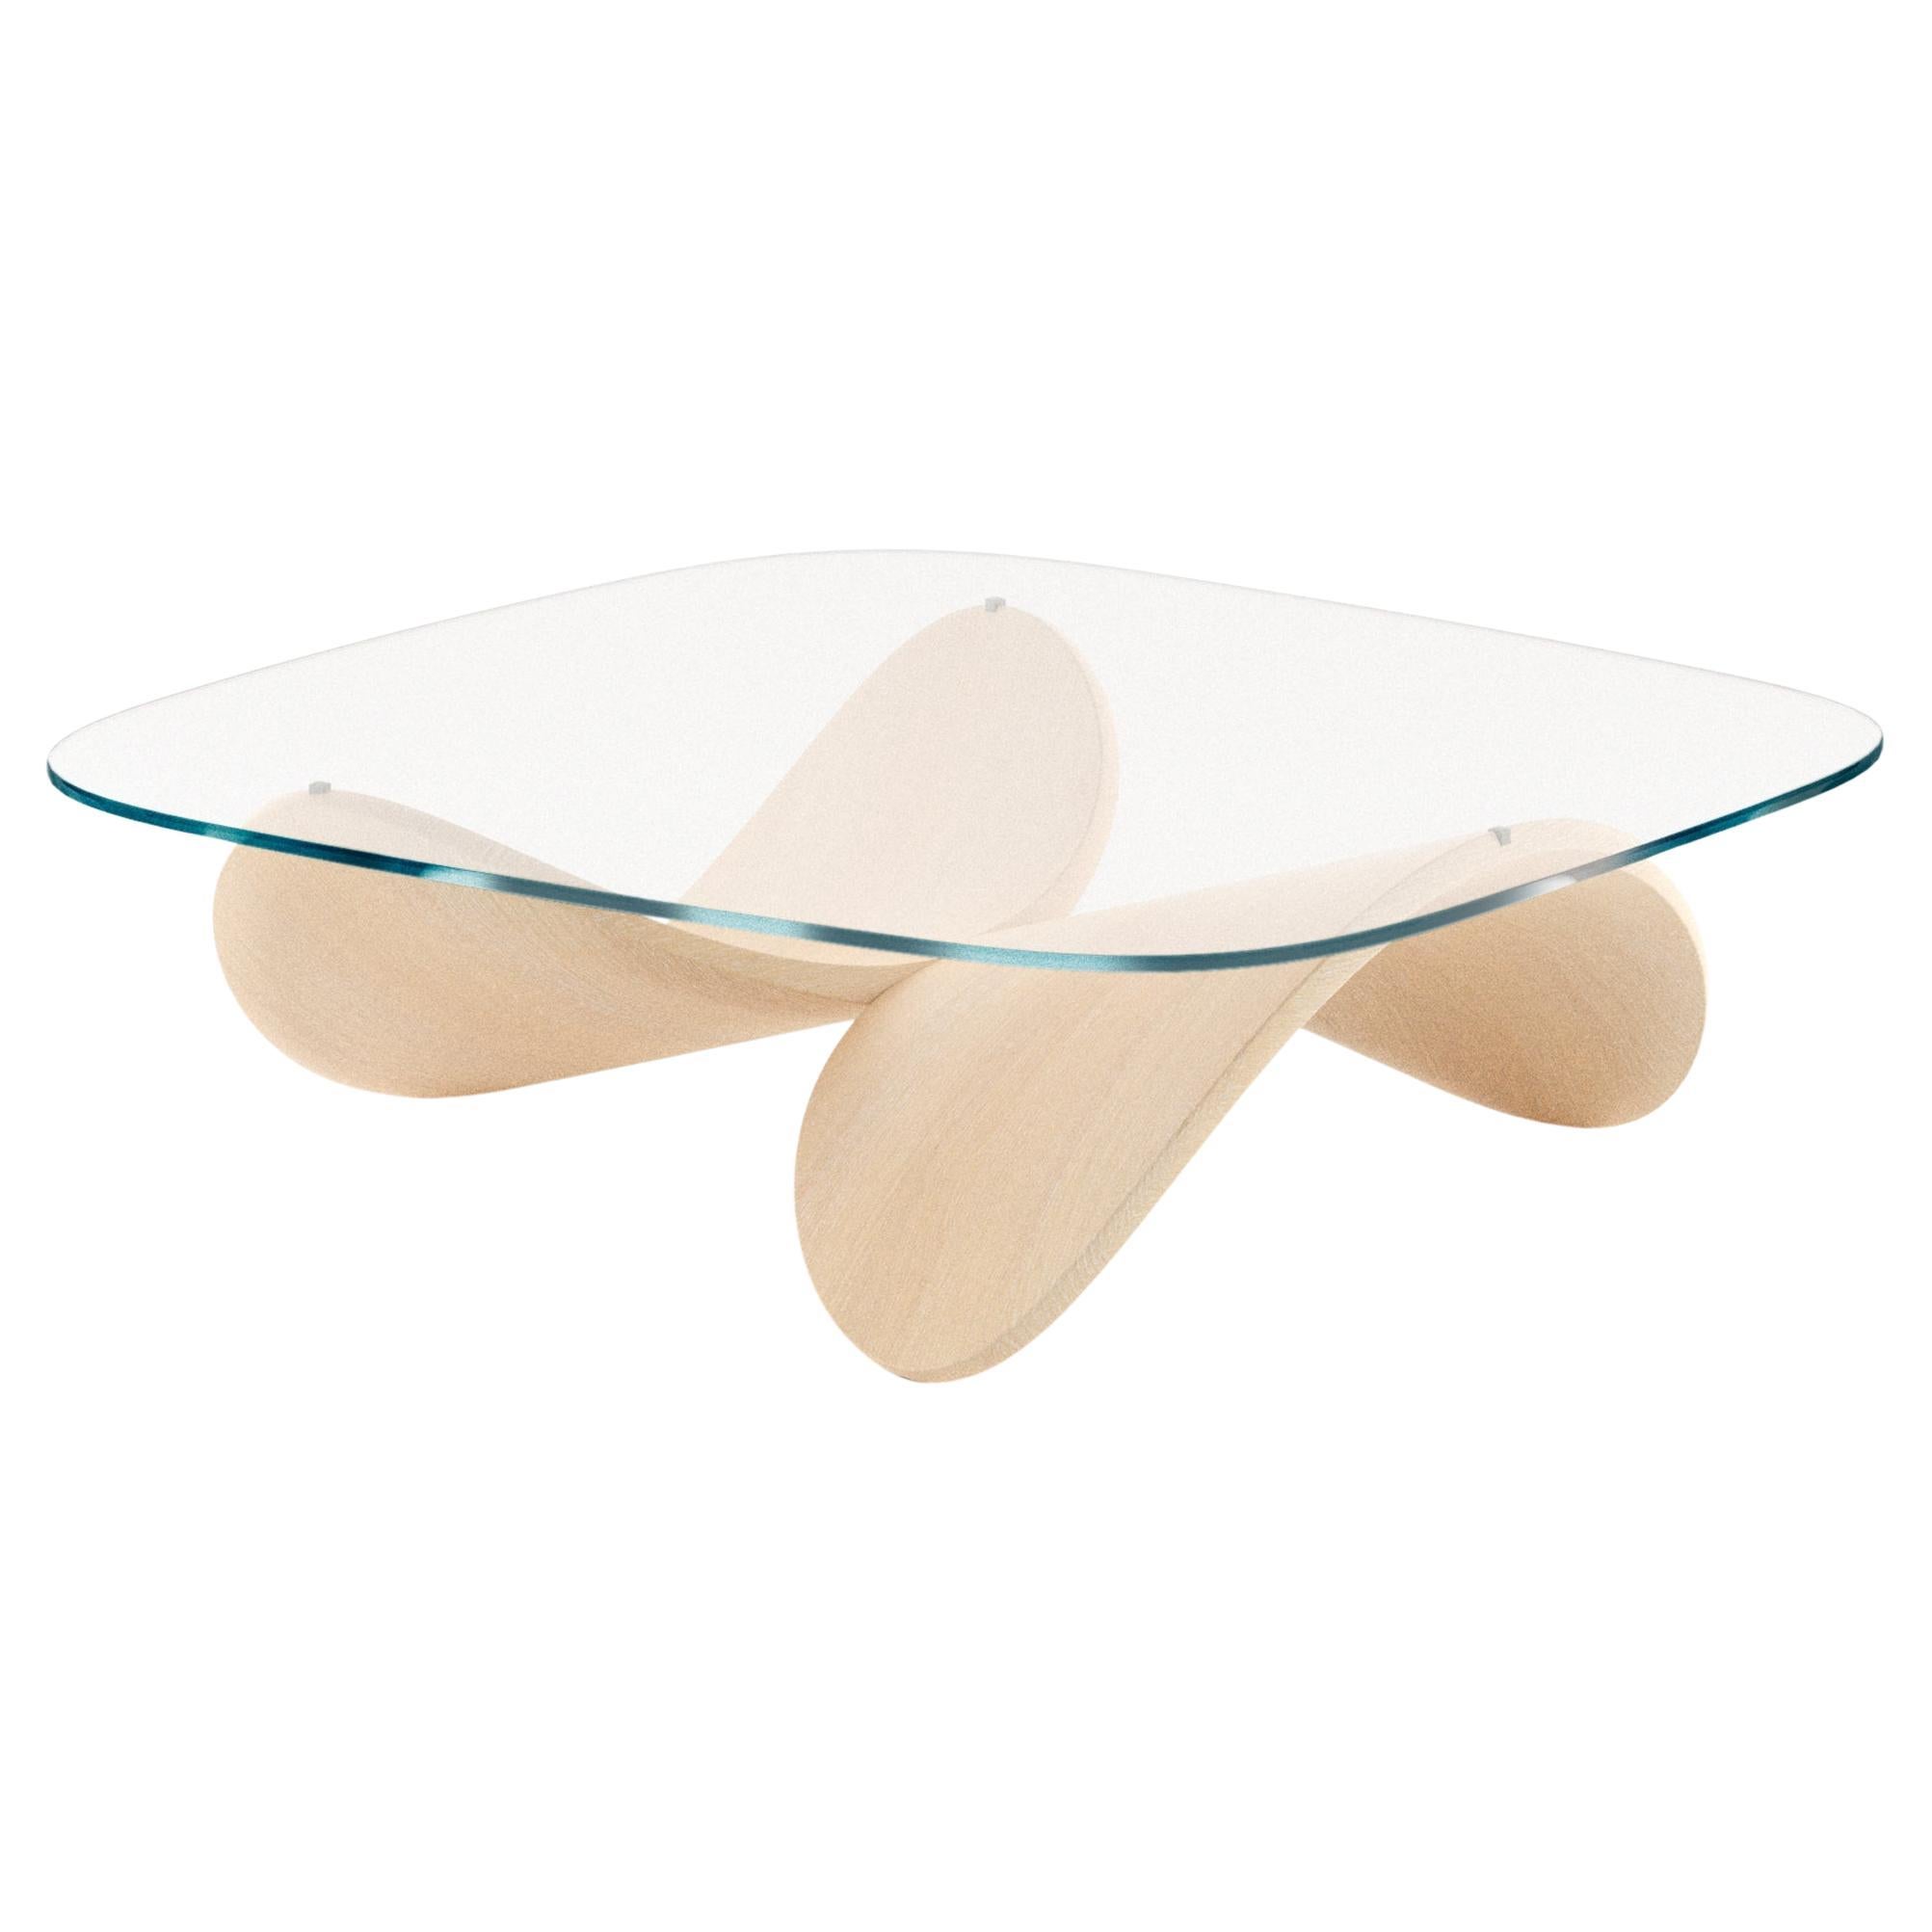 Sandro Lopez's Sculptural Coffee Table in Bent Solid Wood, Natural Ash, Italy For Sale